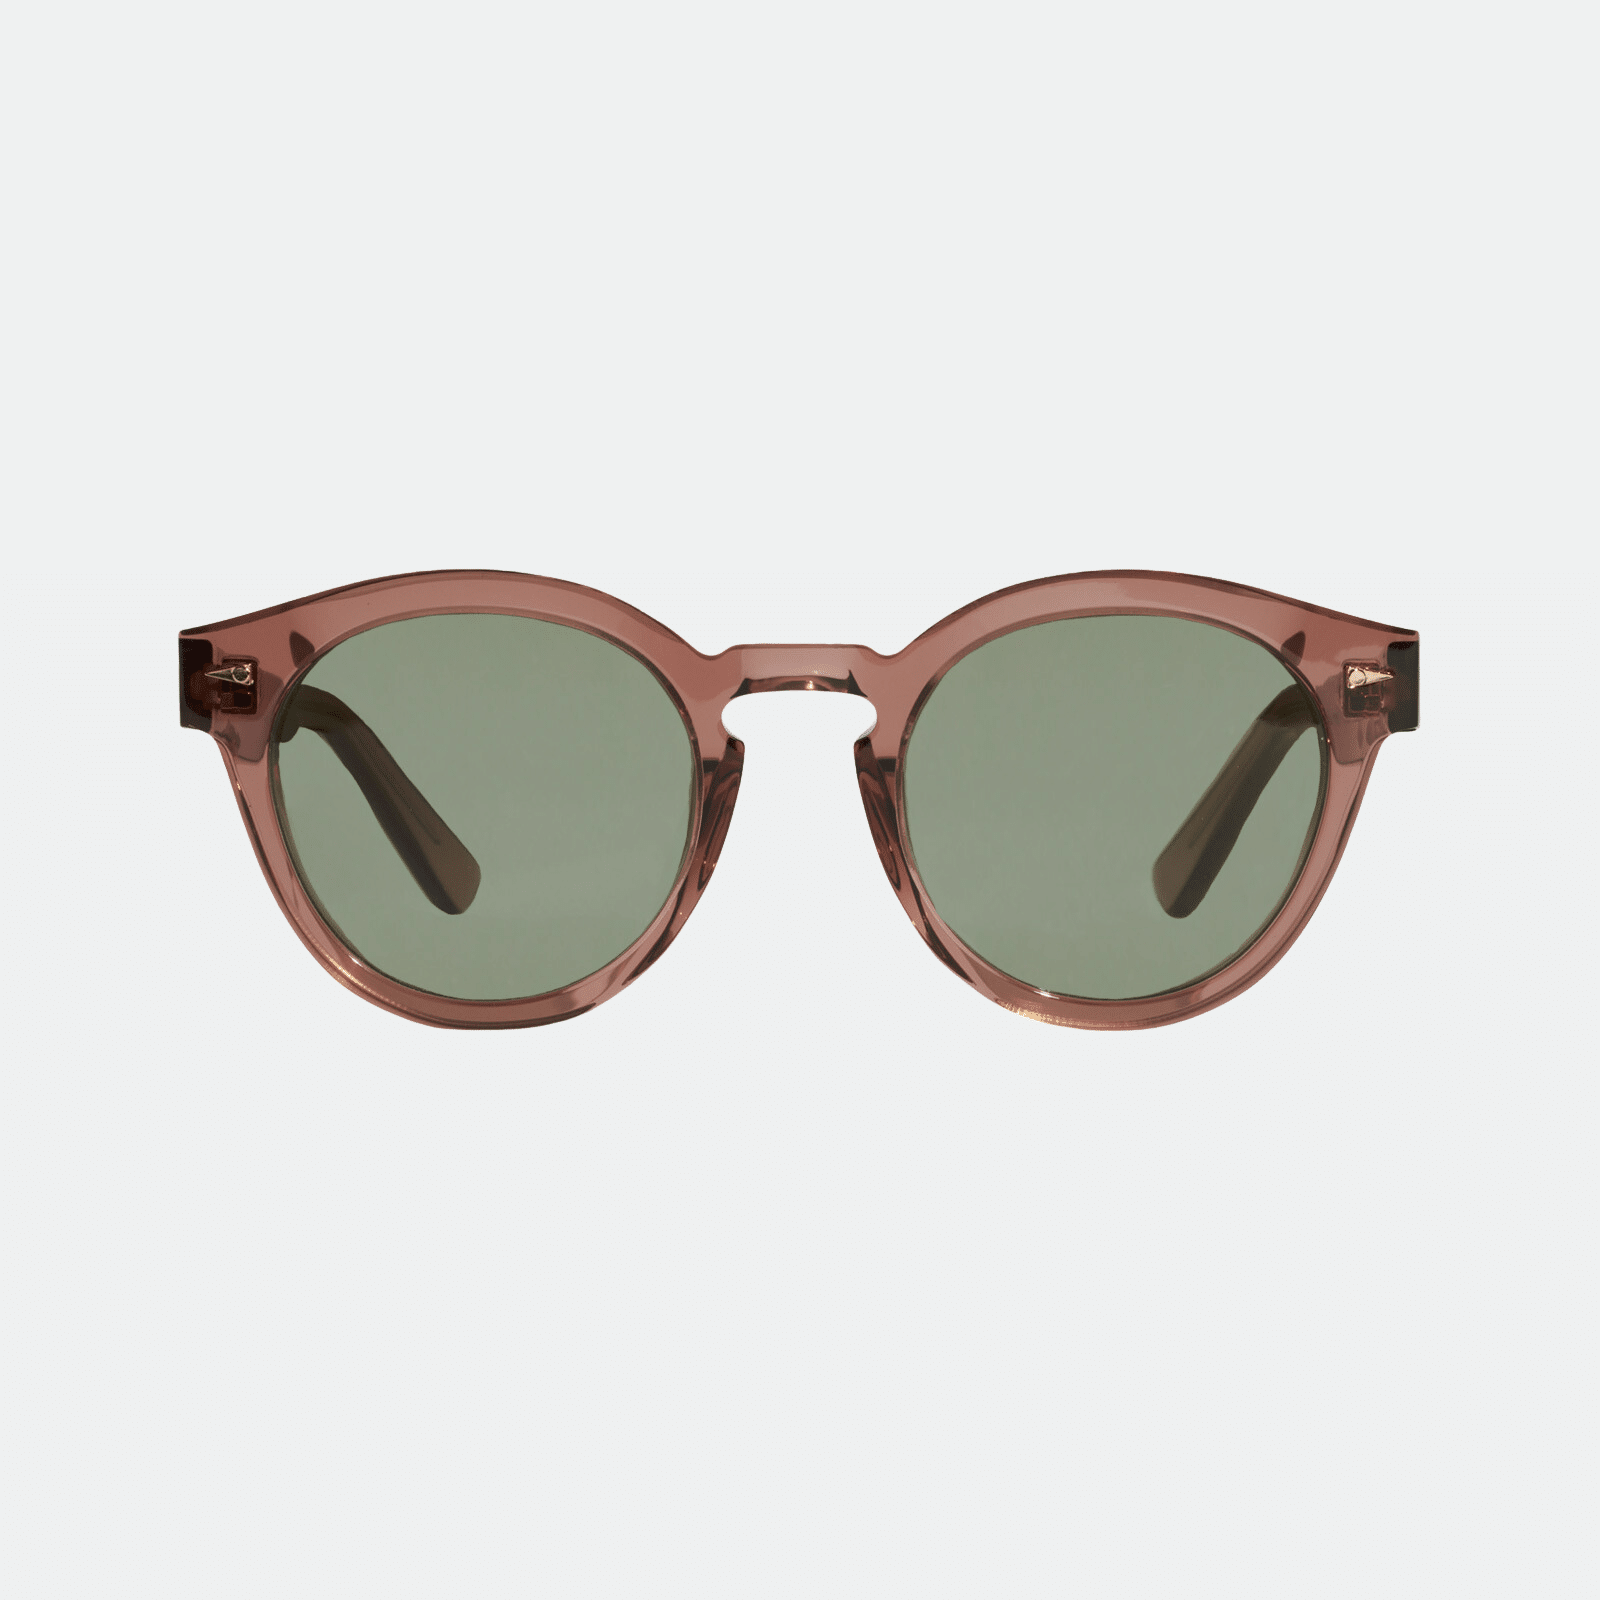 Ahlem Abbesses Sunglasses in Old Fashioned Rose